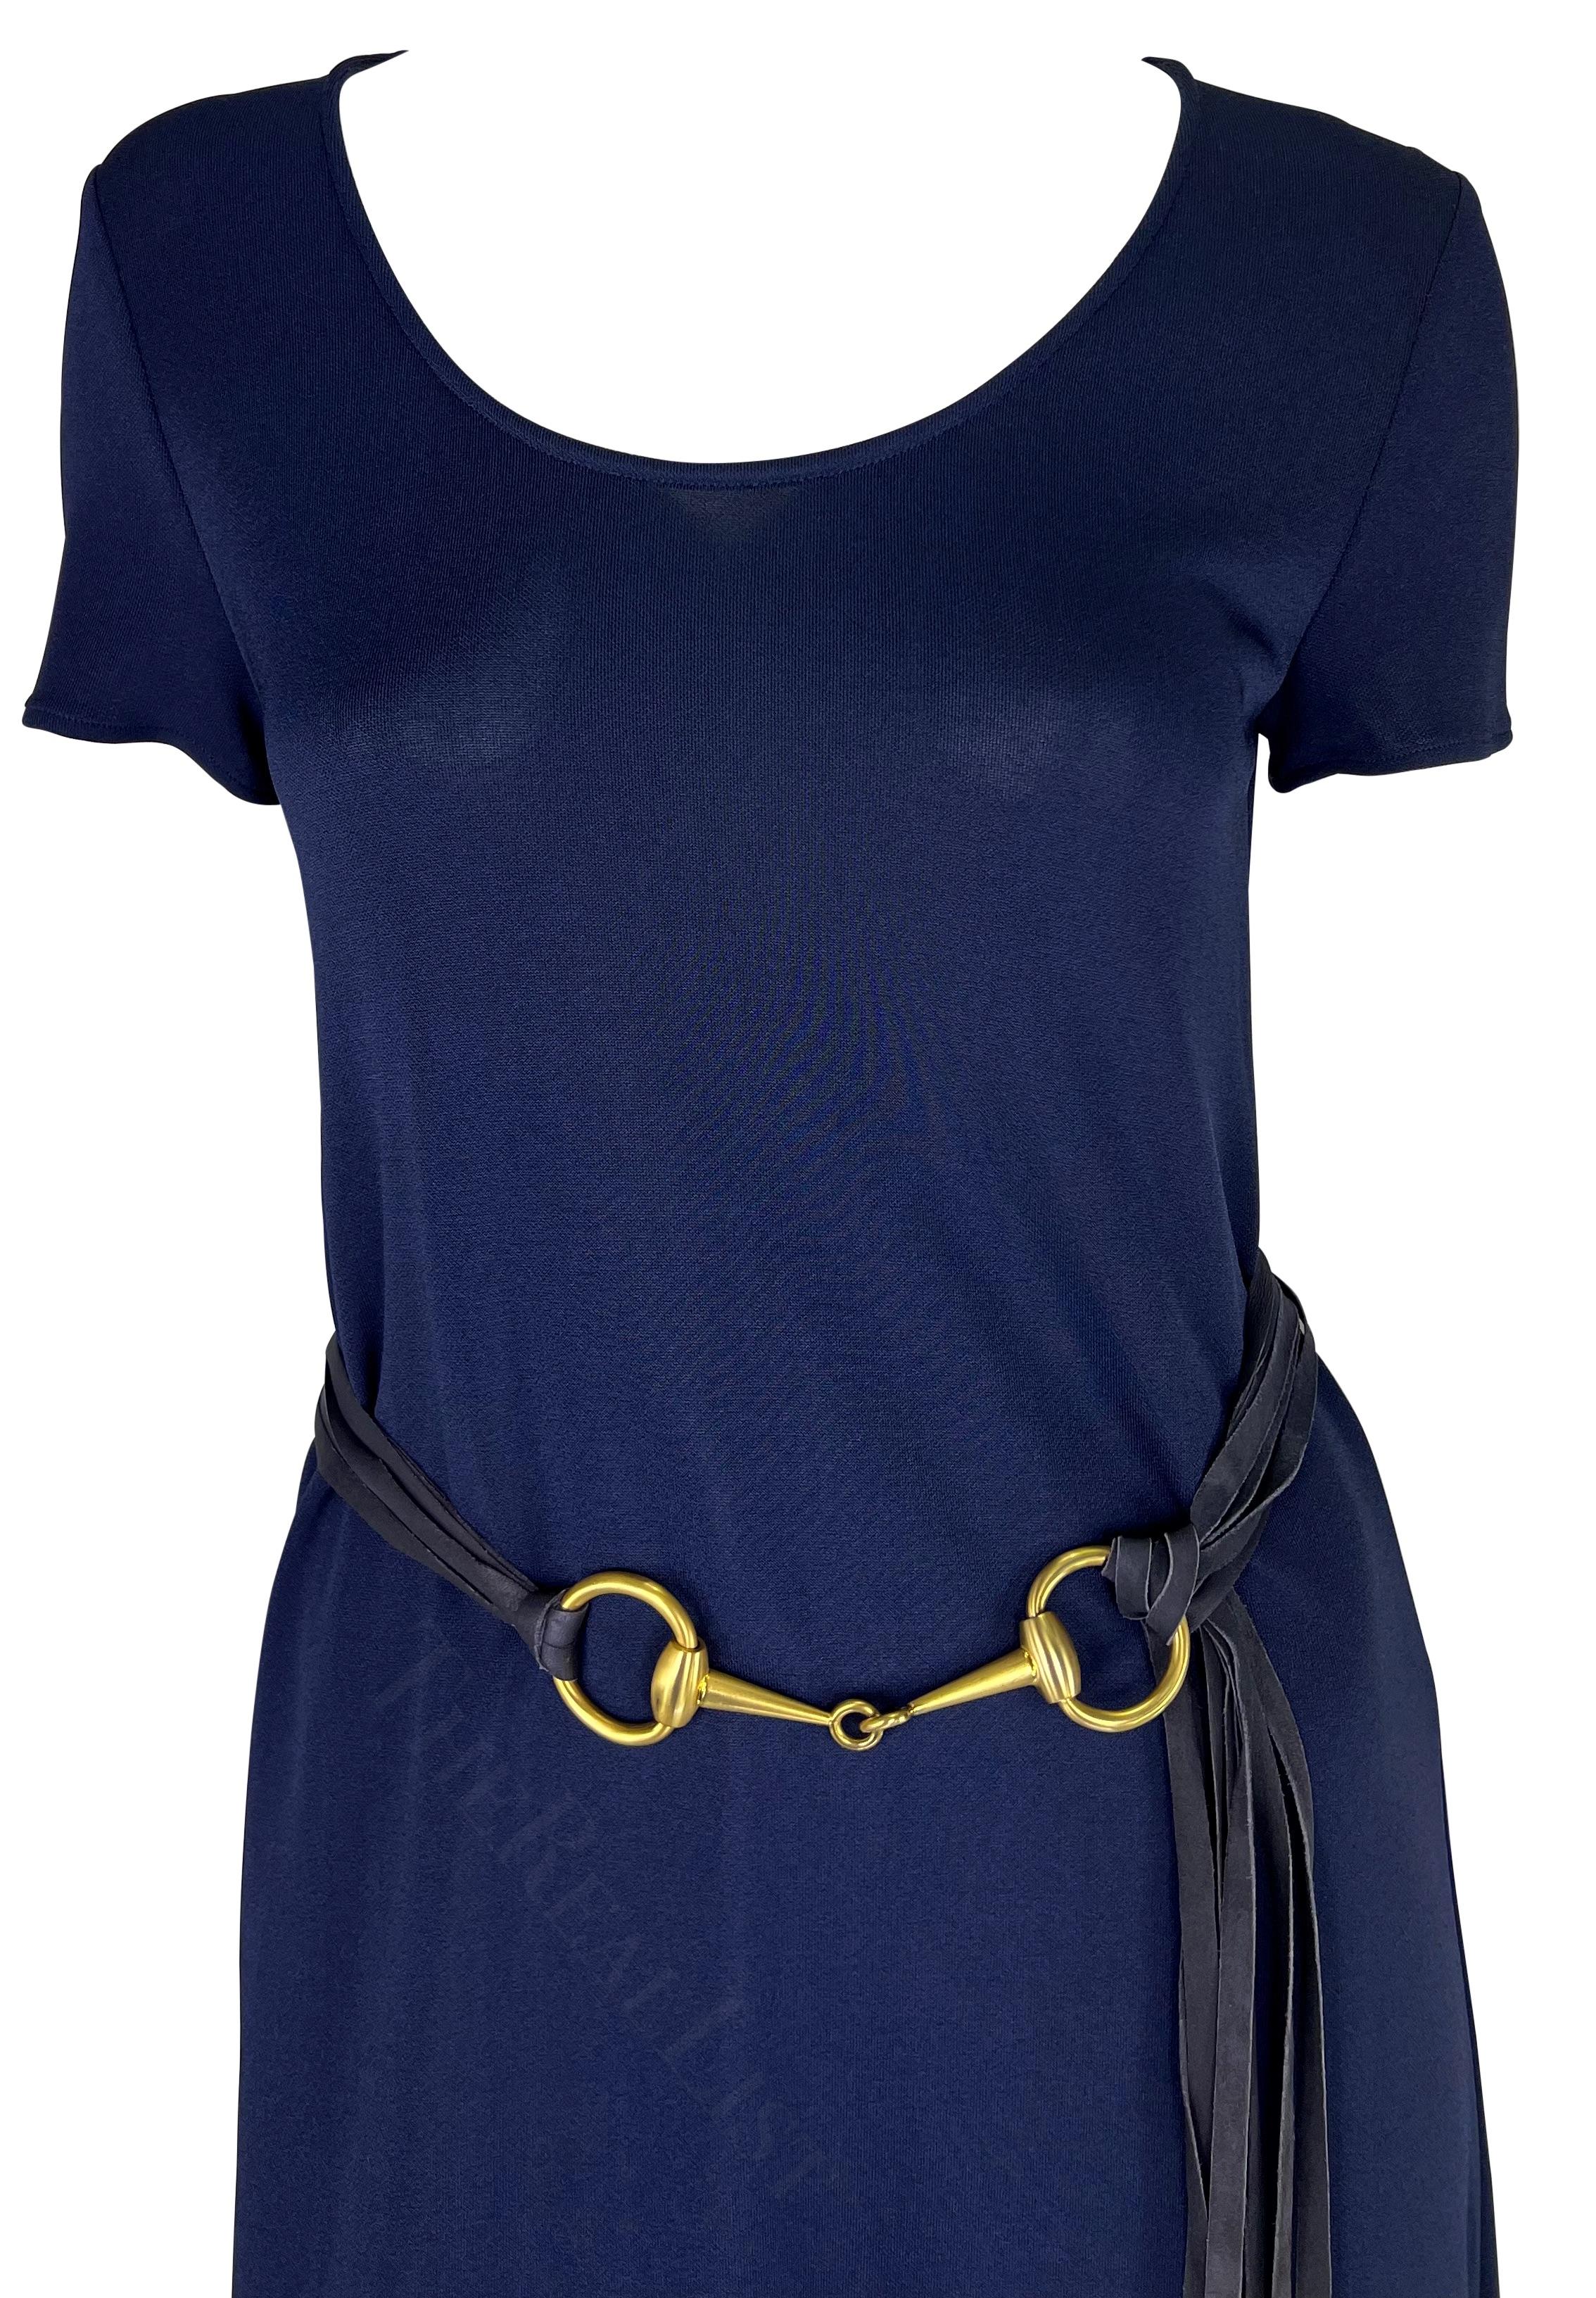 Presenting a beautiful navy knit Gucci dress. From the Spring/Summer 1994 collection, this dress features short sleeves, a scoop neckline and is made complete with a large matching gold-tone horse bit belt. The matching belt is constructed of